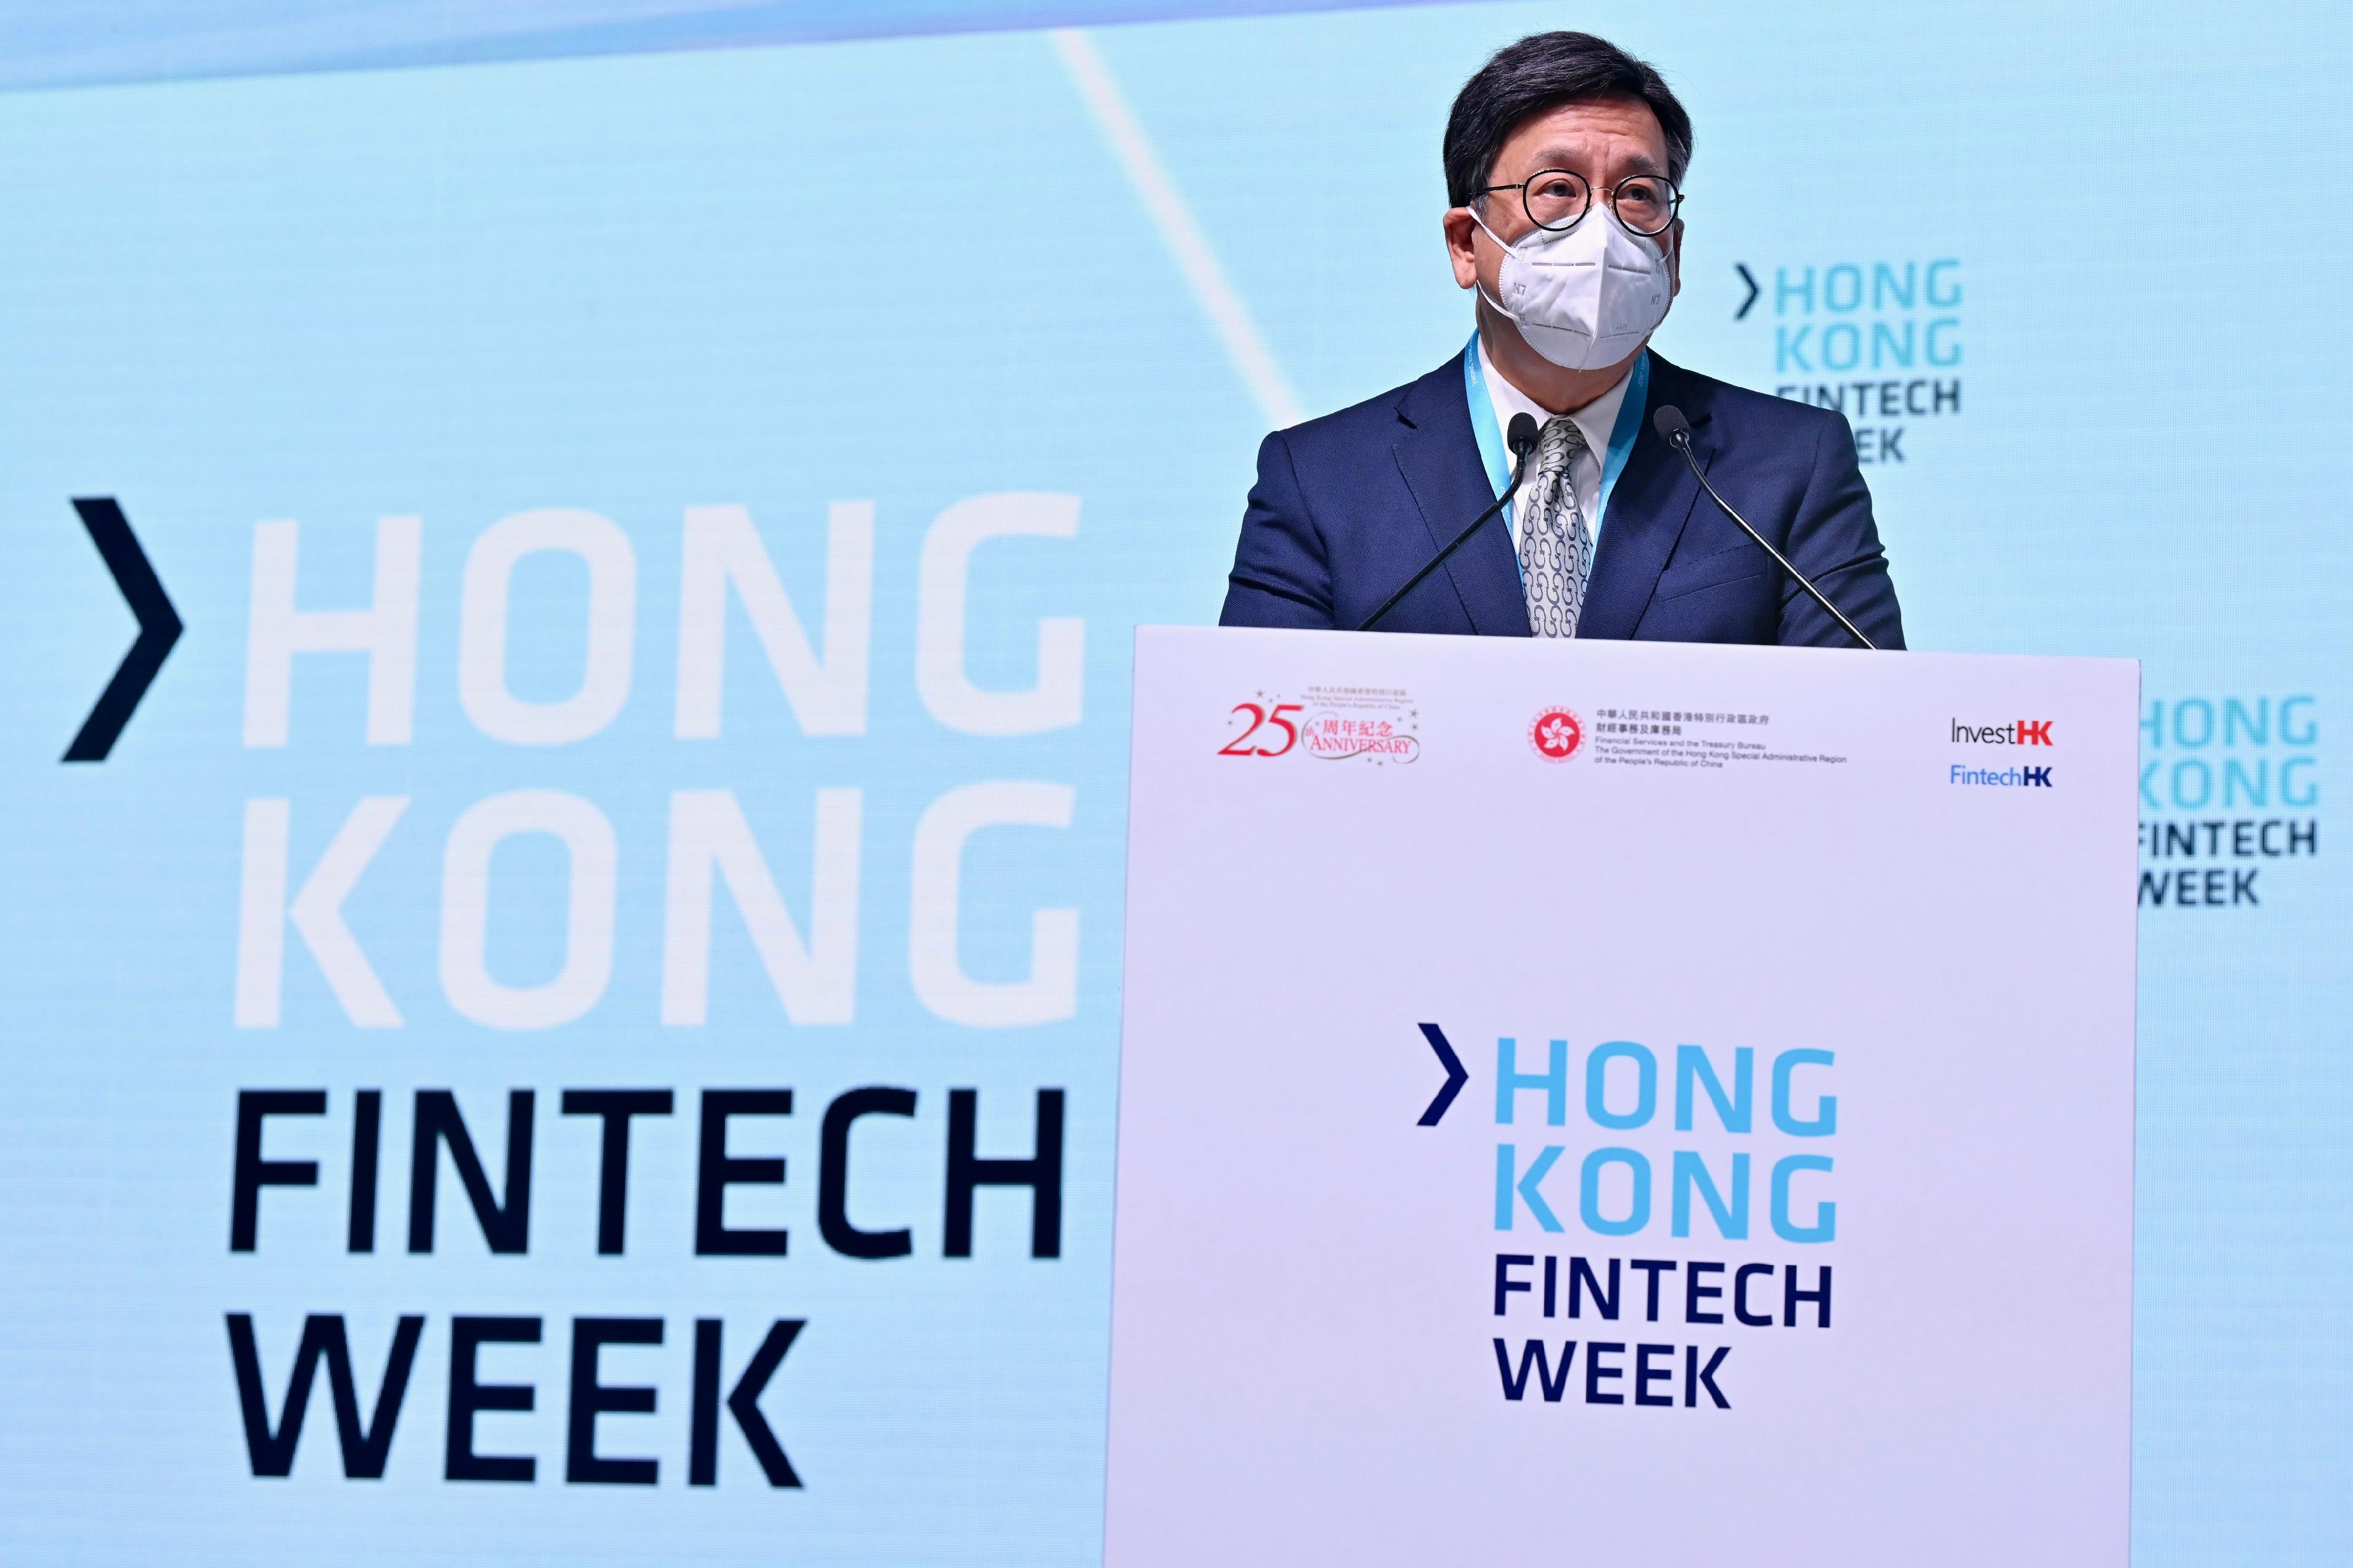 The five-day Hong Kong FinTech Week 2022 attracted over 30 000 visitors and more than five million online views from over 95 economies. Photo shows the Secretary for Commerce and Economic Development, Mr Algernon Yau, presenting the opening keynote address on November 1, in which he underlined the vast opportunities available in the Guangdong-Hong Kong-Macao Greater Bay Area.